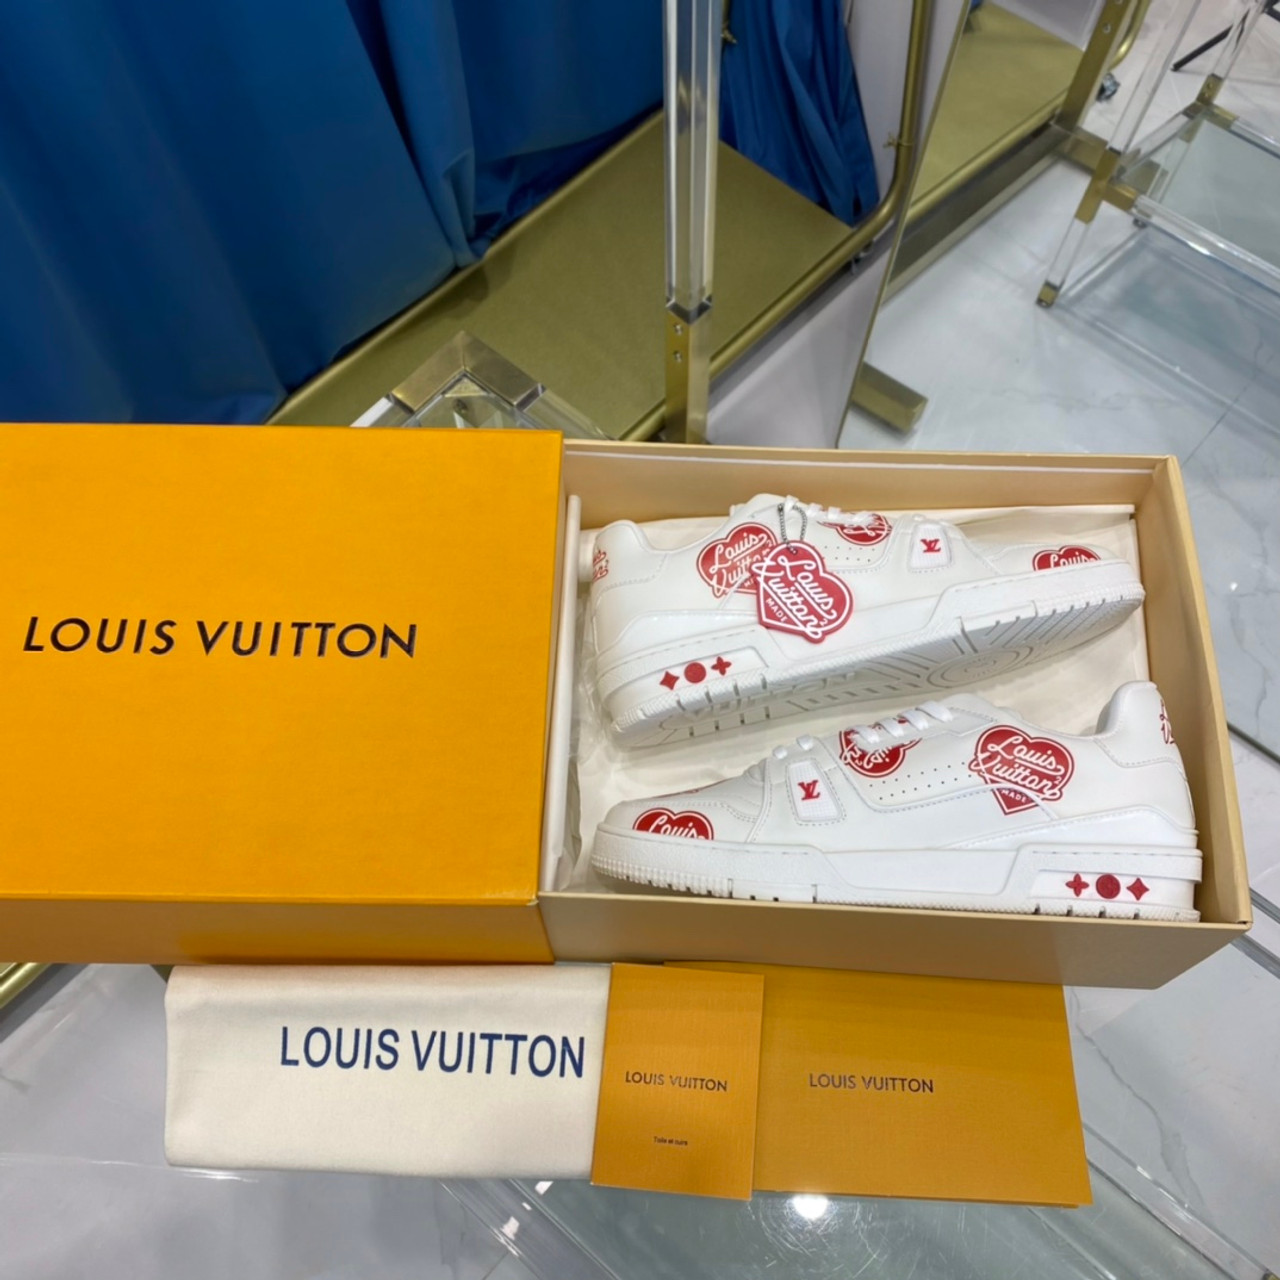 High Quality LOUIS VUITTON High 8 ET (LVSK8) Sneakers in Victoria